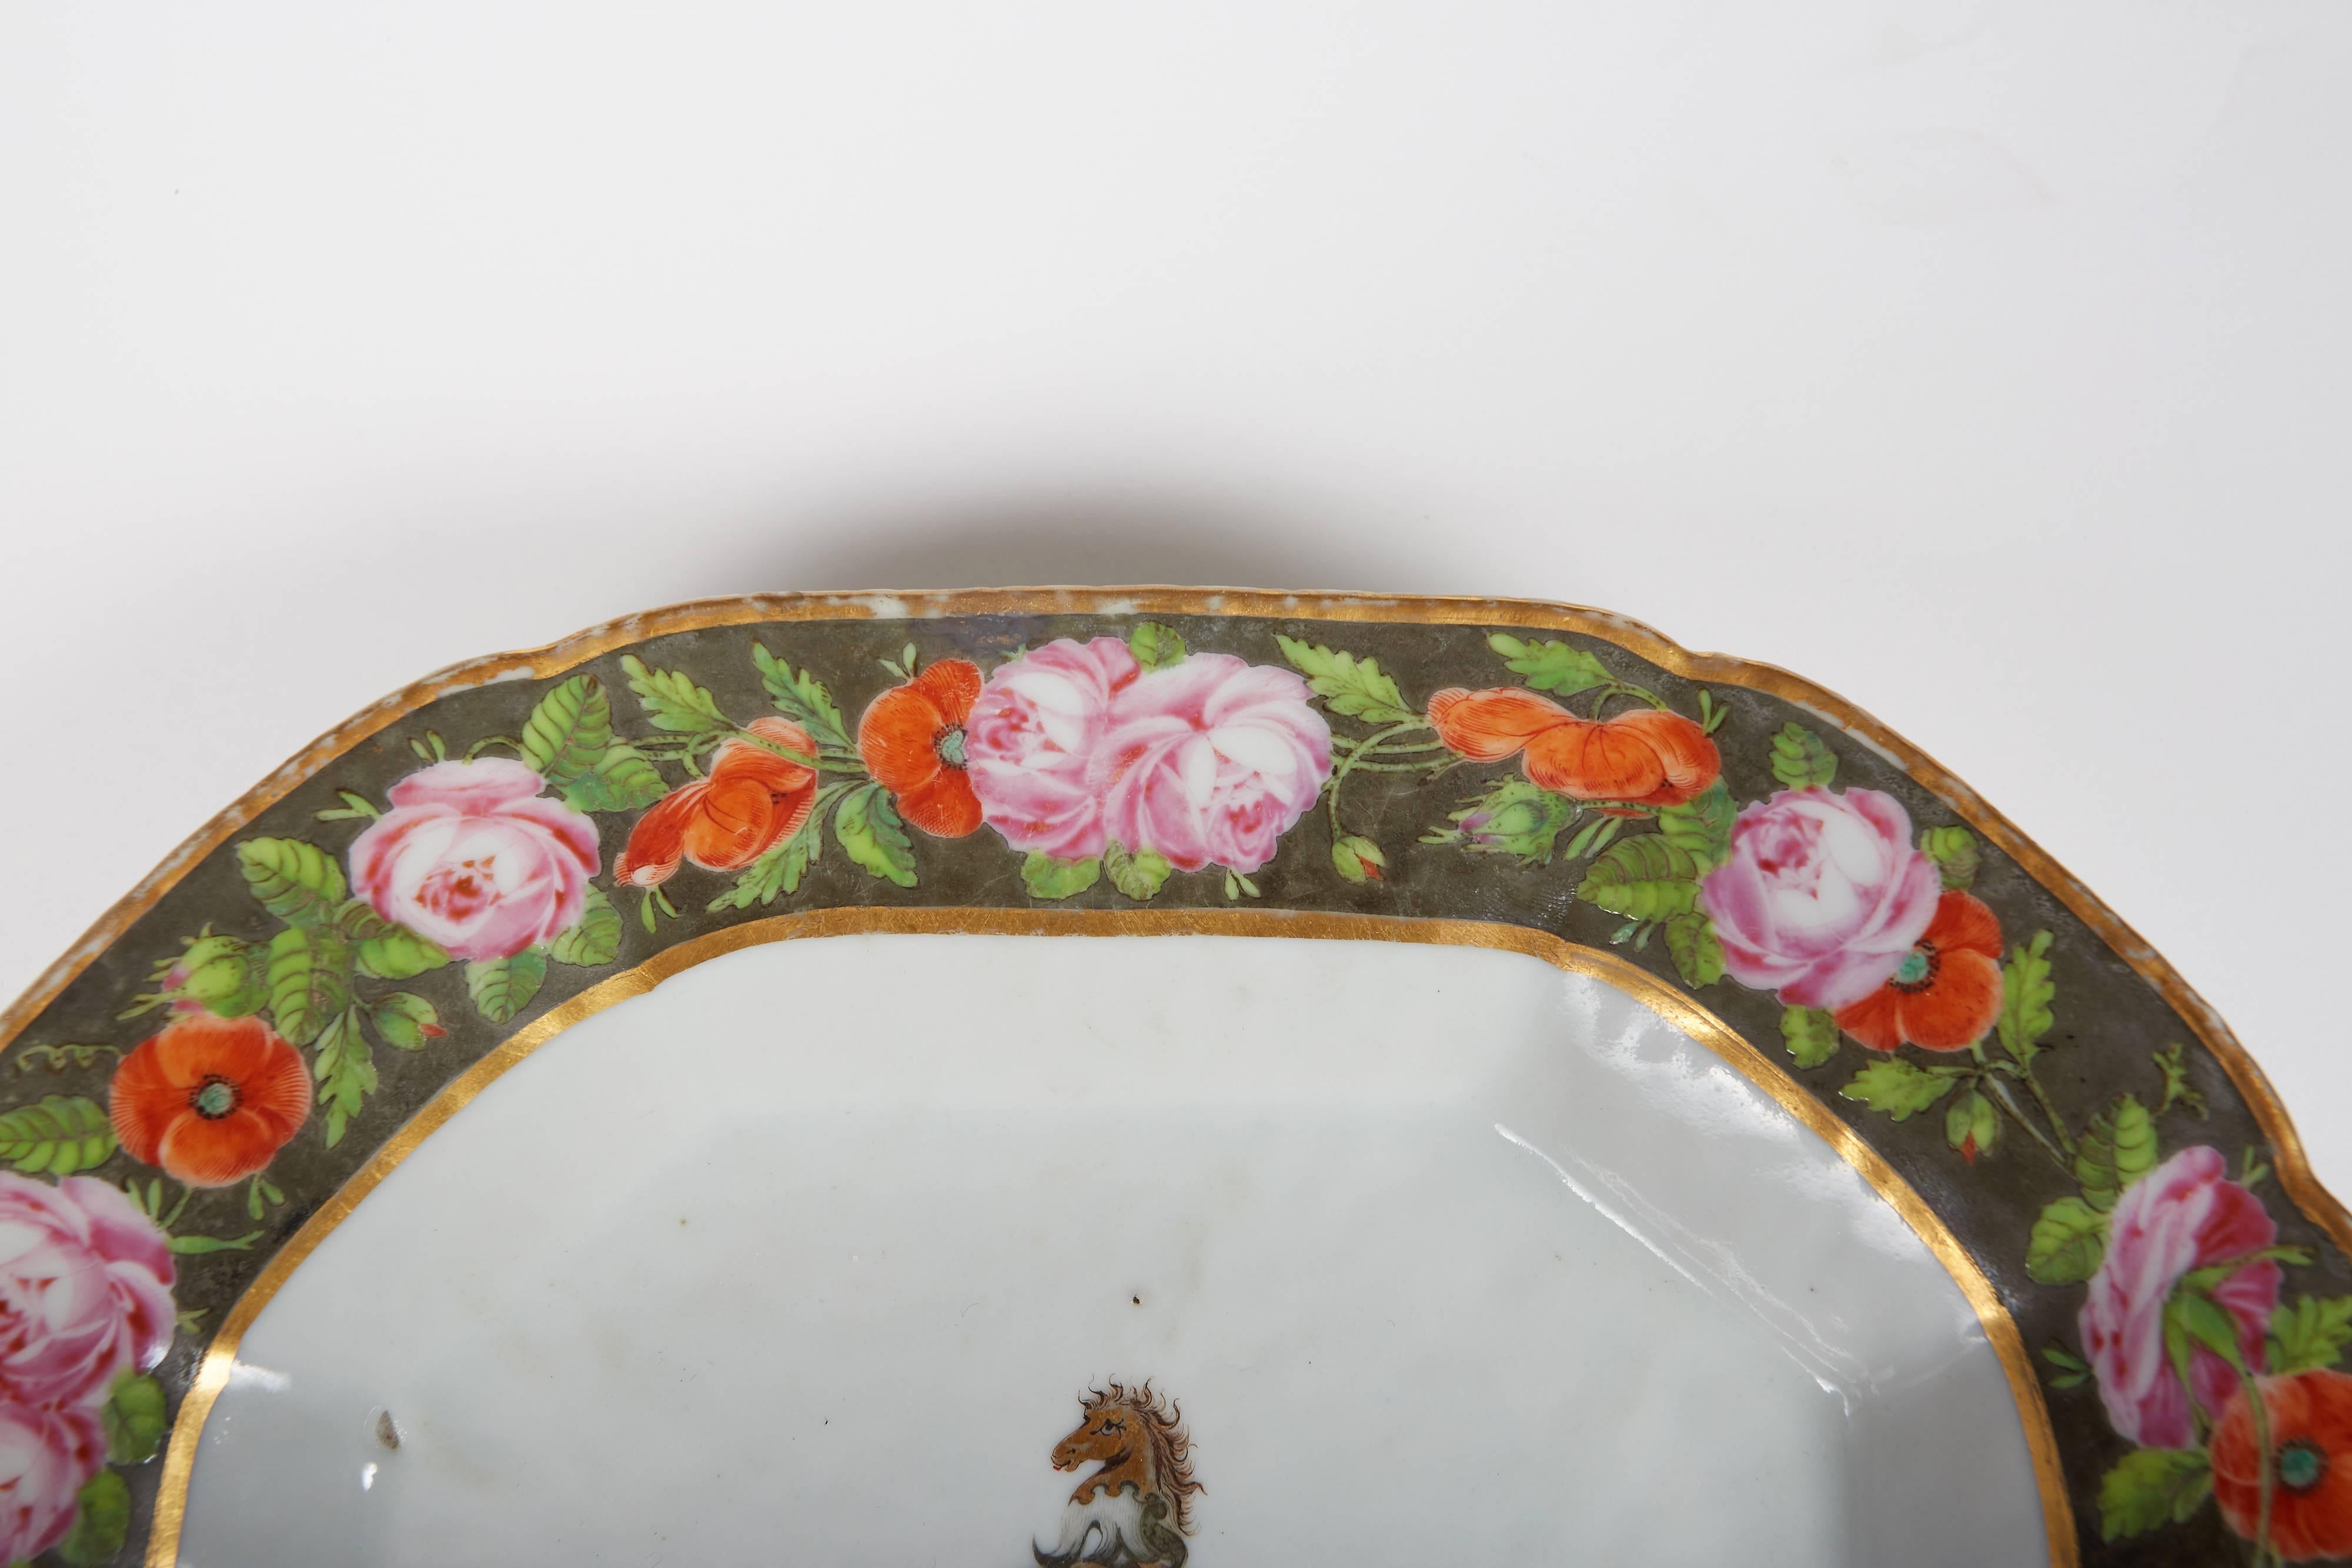 Rare armorial tray bearing the arms of Smyth impaling Denison as described in Chinese Armorial Porcelain Vol. II by David Sanctuary Howard (p.669), Jiaqing, circa 1810. Beautiful European floral style border against a dark gray background with gilt